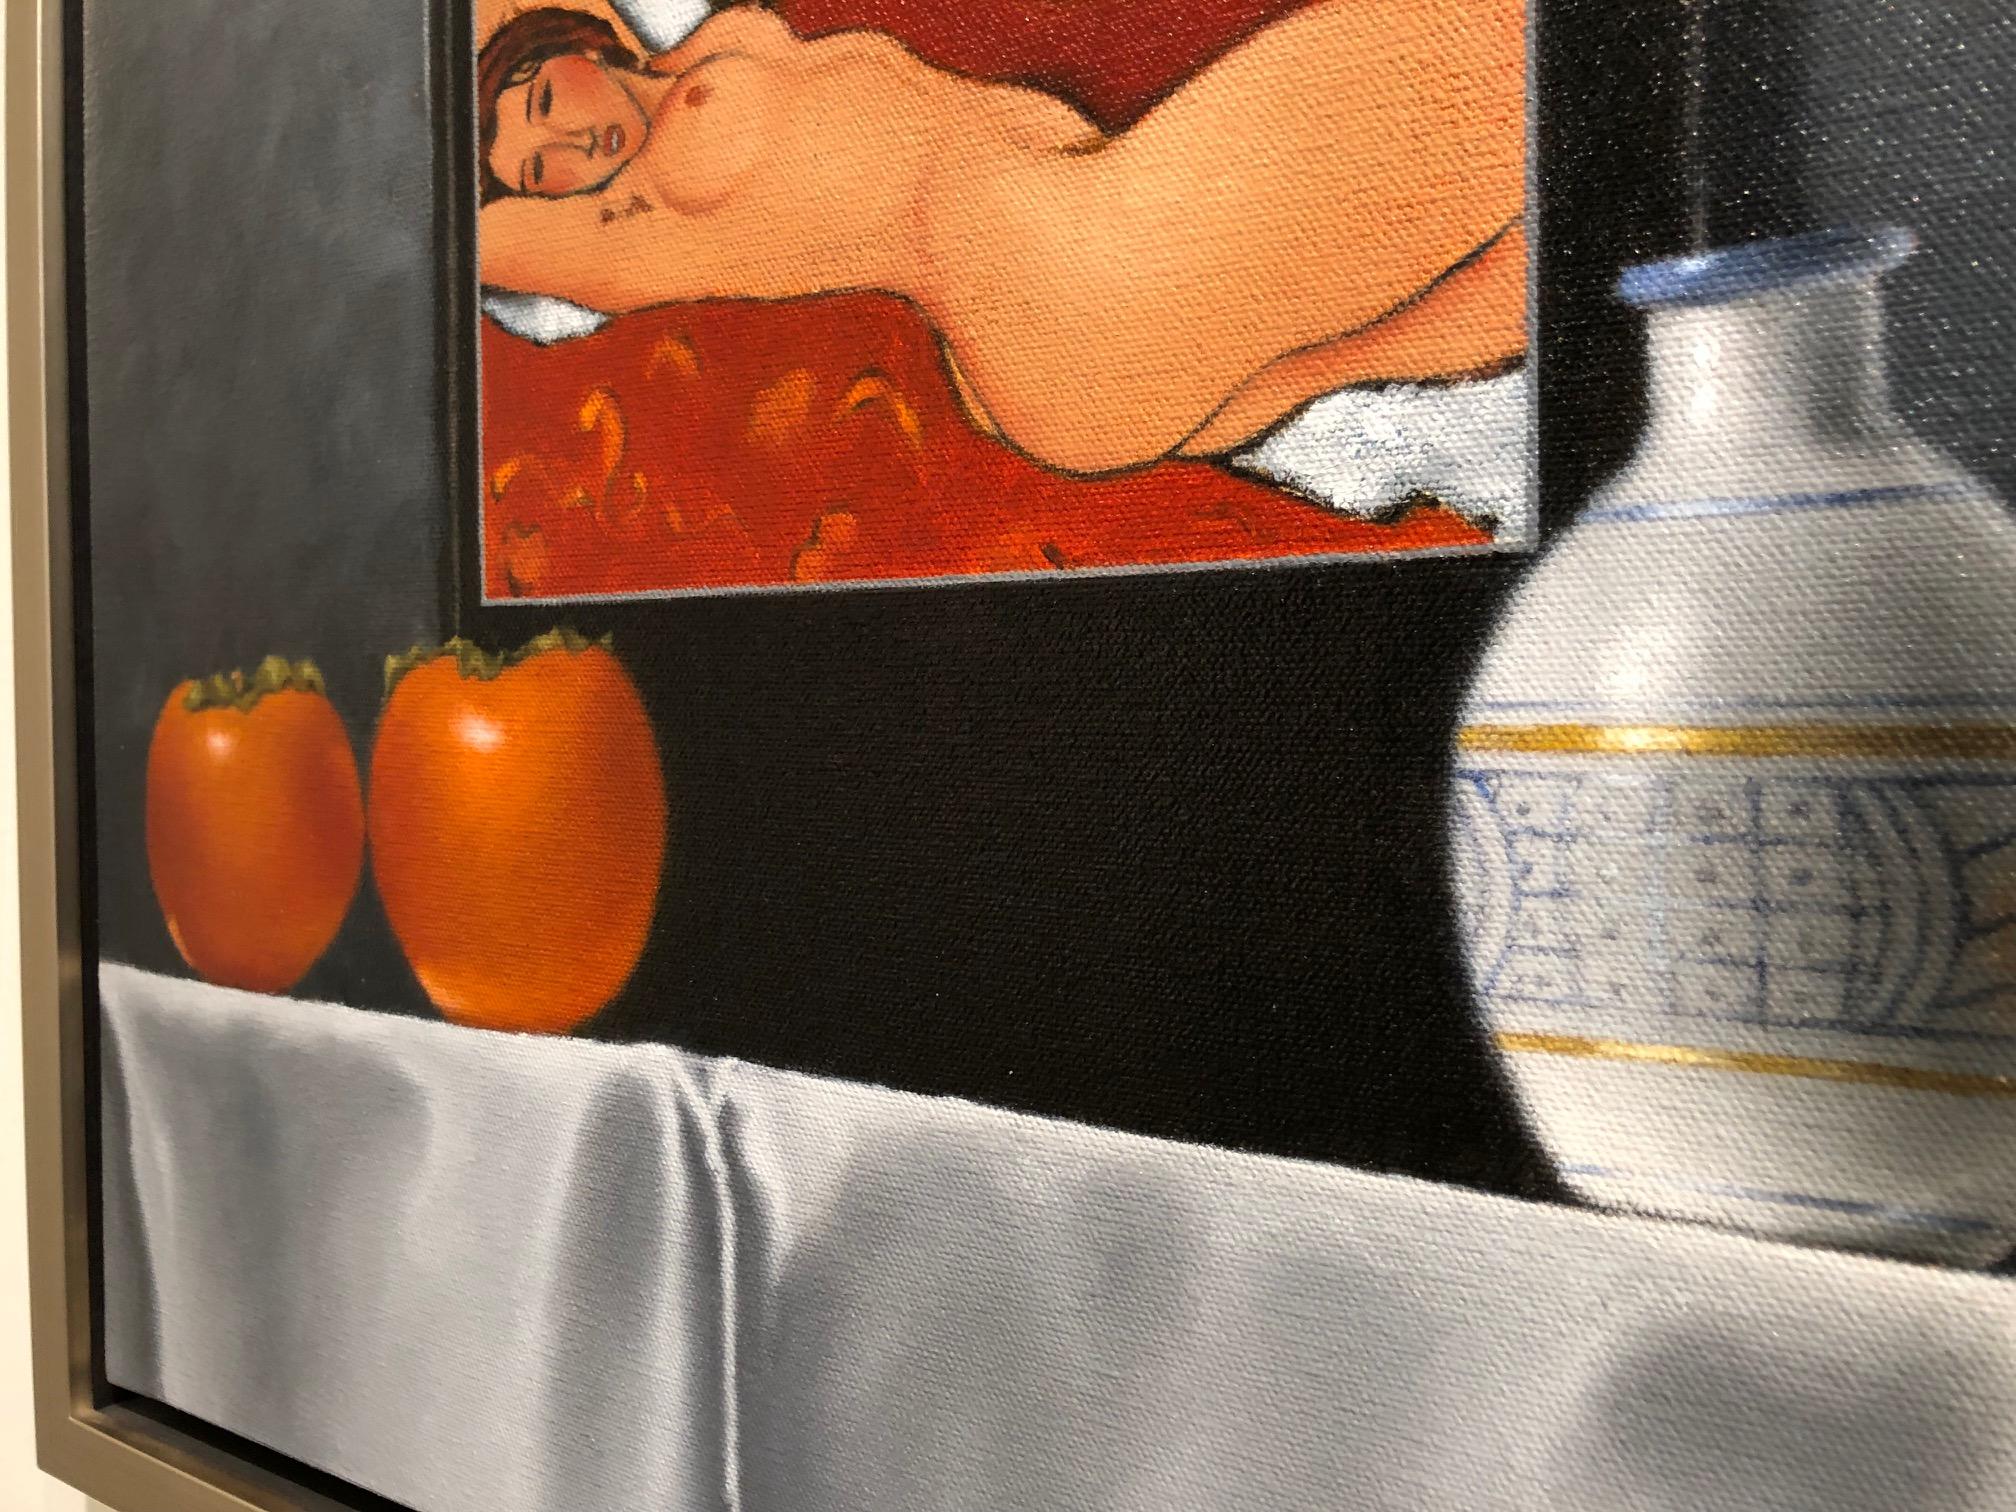 Painters in Paris / oil on canvas with Modigliani  and persimmons - Contemporary Painting by Mimi Jensen